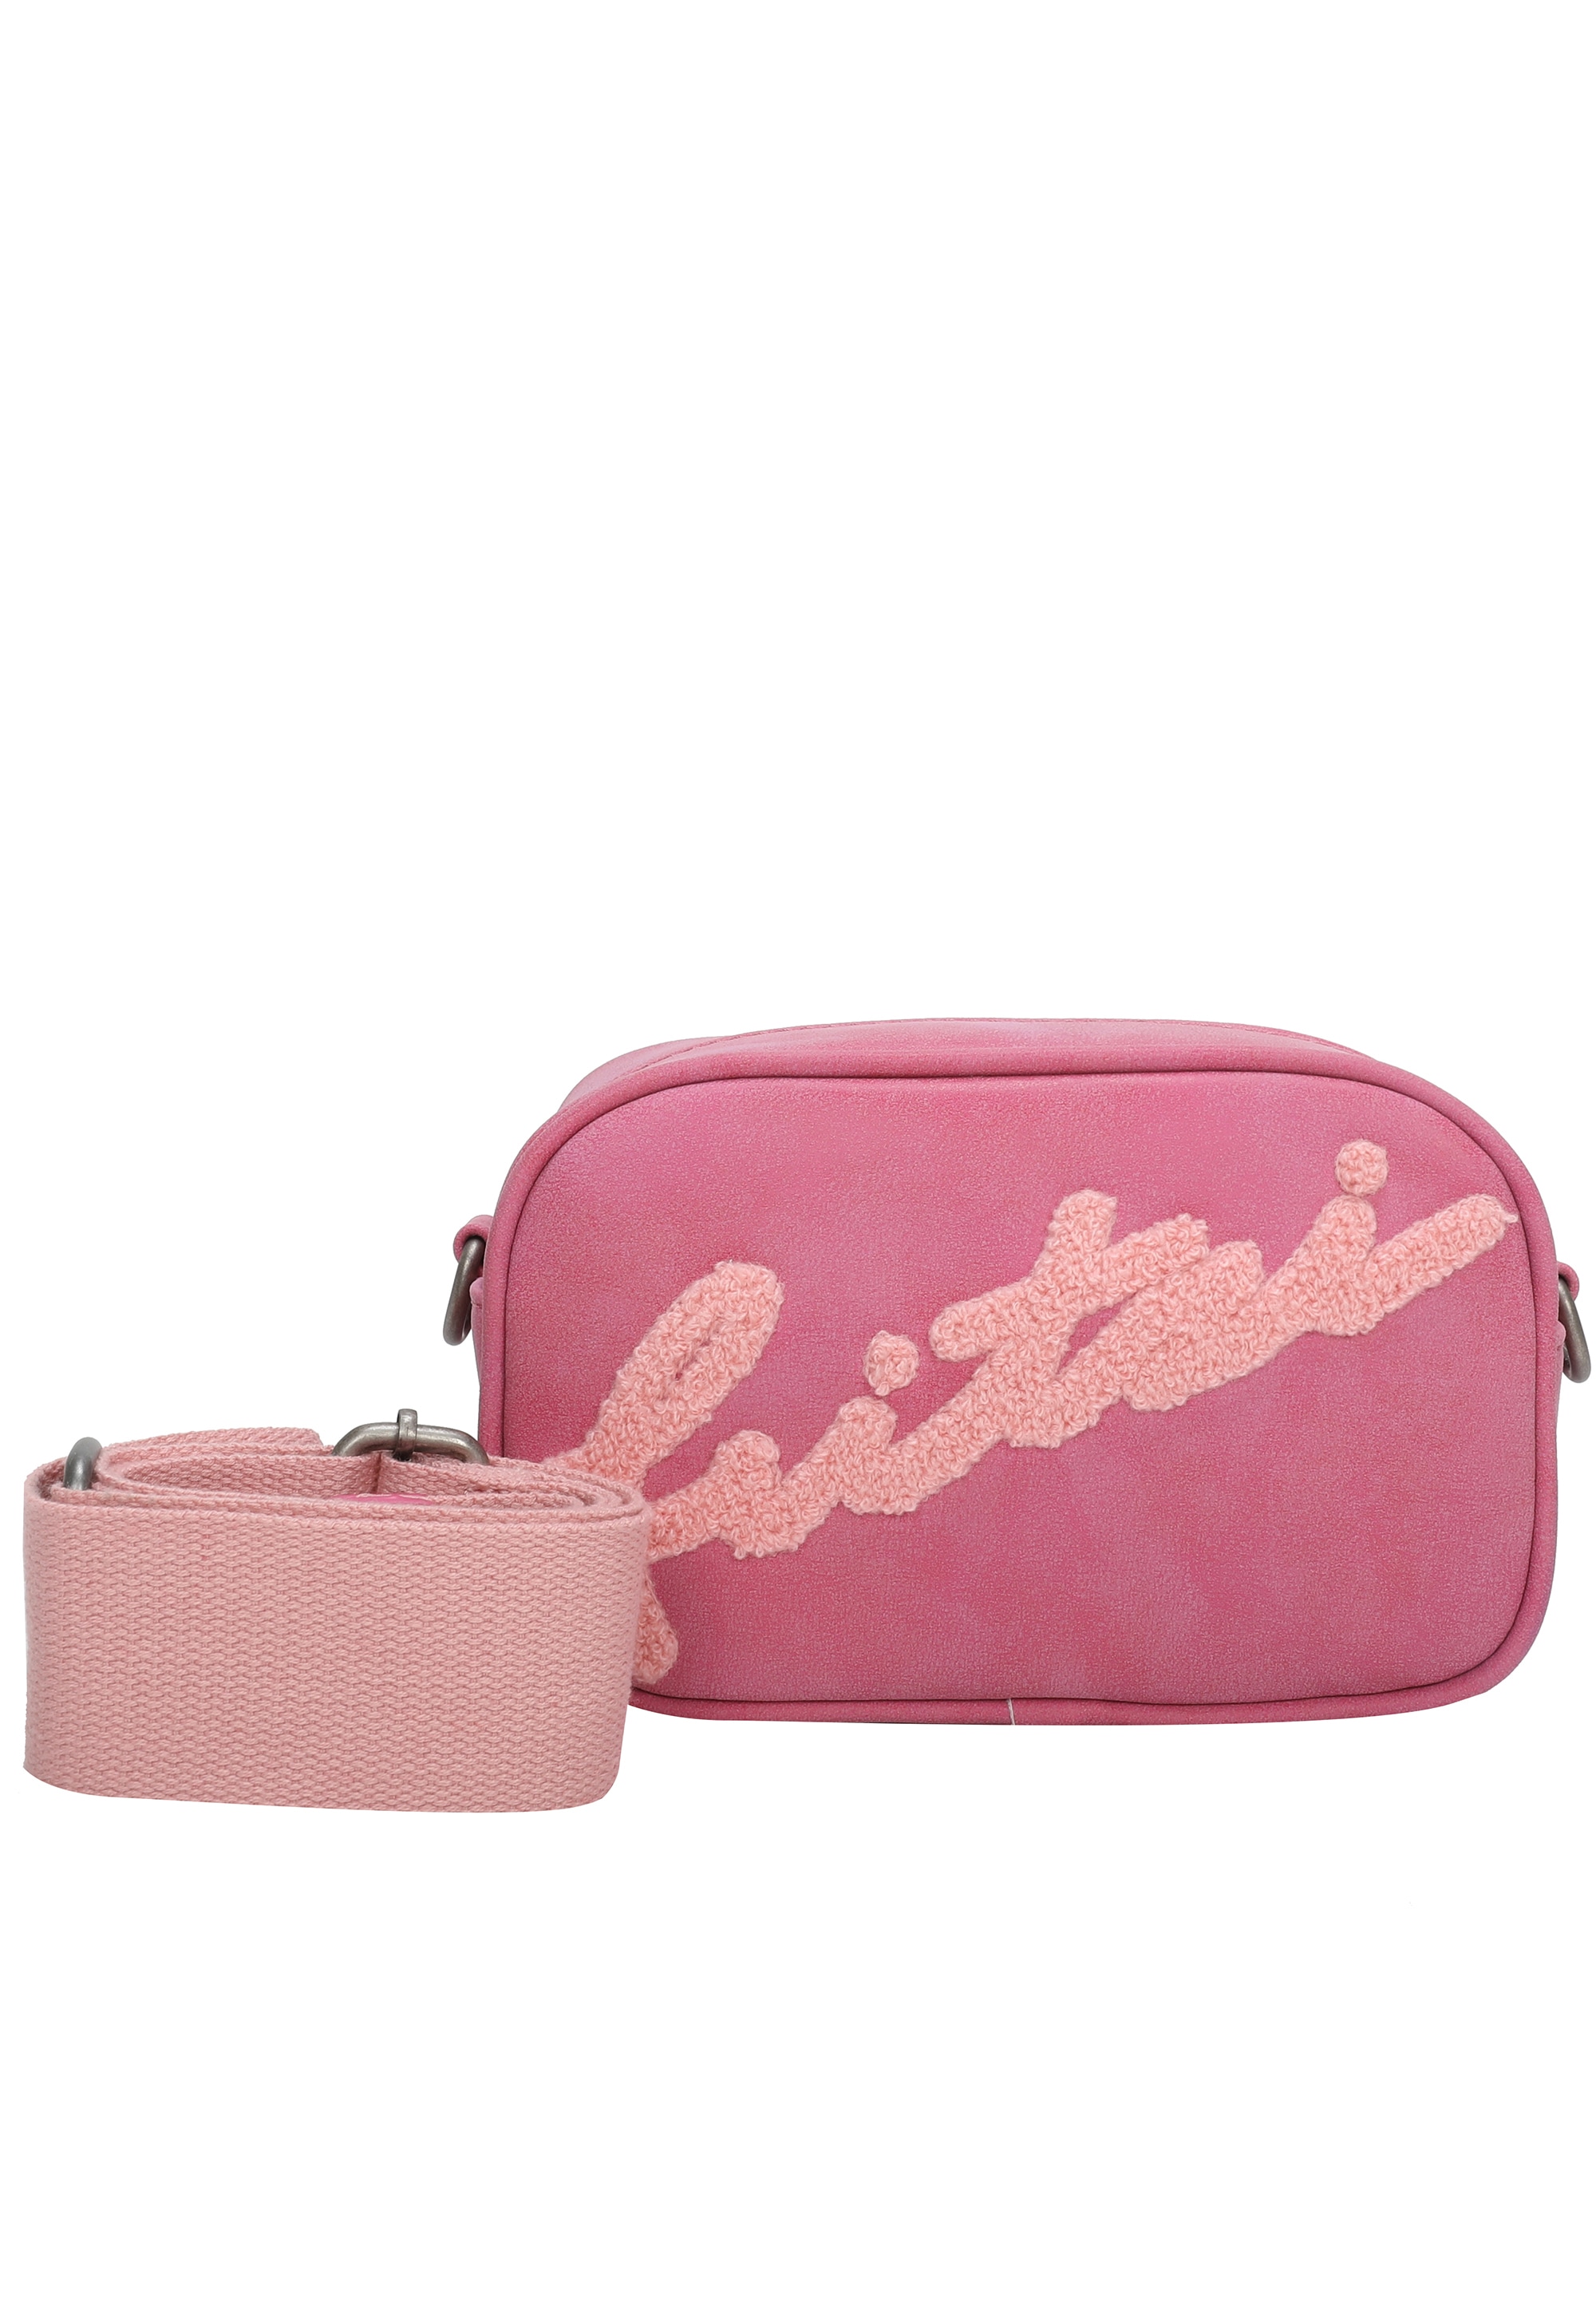 Schultertasche »Easy Go Limited Flocked«, mit Frottee-Logo-Print